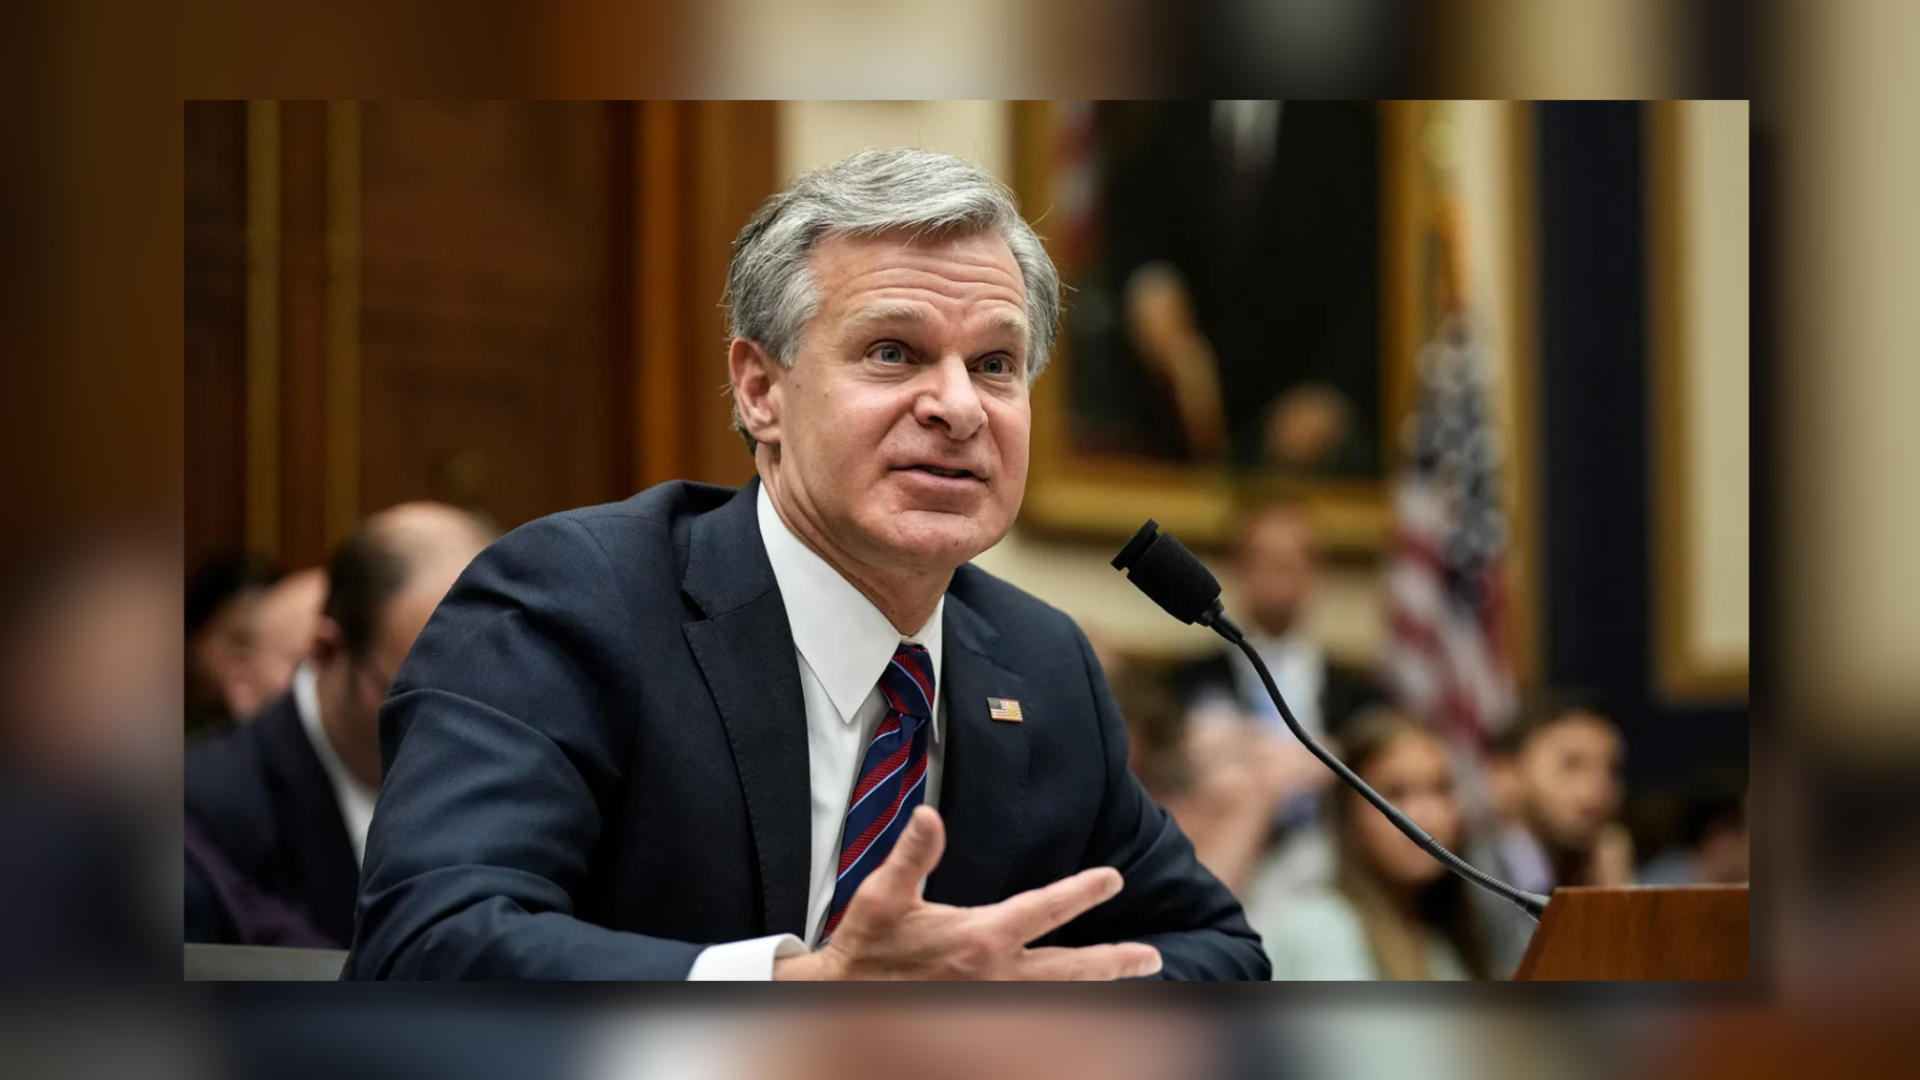 FBI Cautions Congress: Potential Coordinated US Attack Post Russia Tragedy